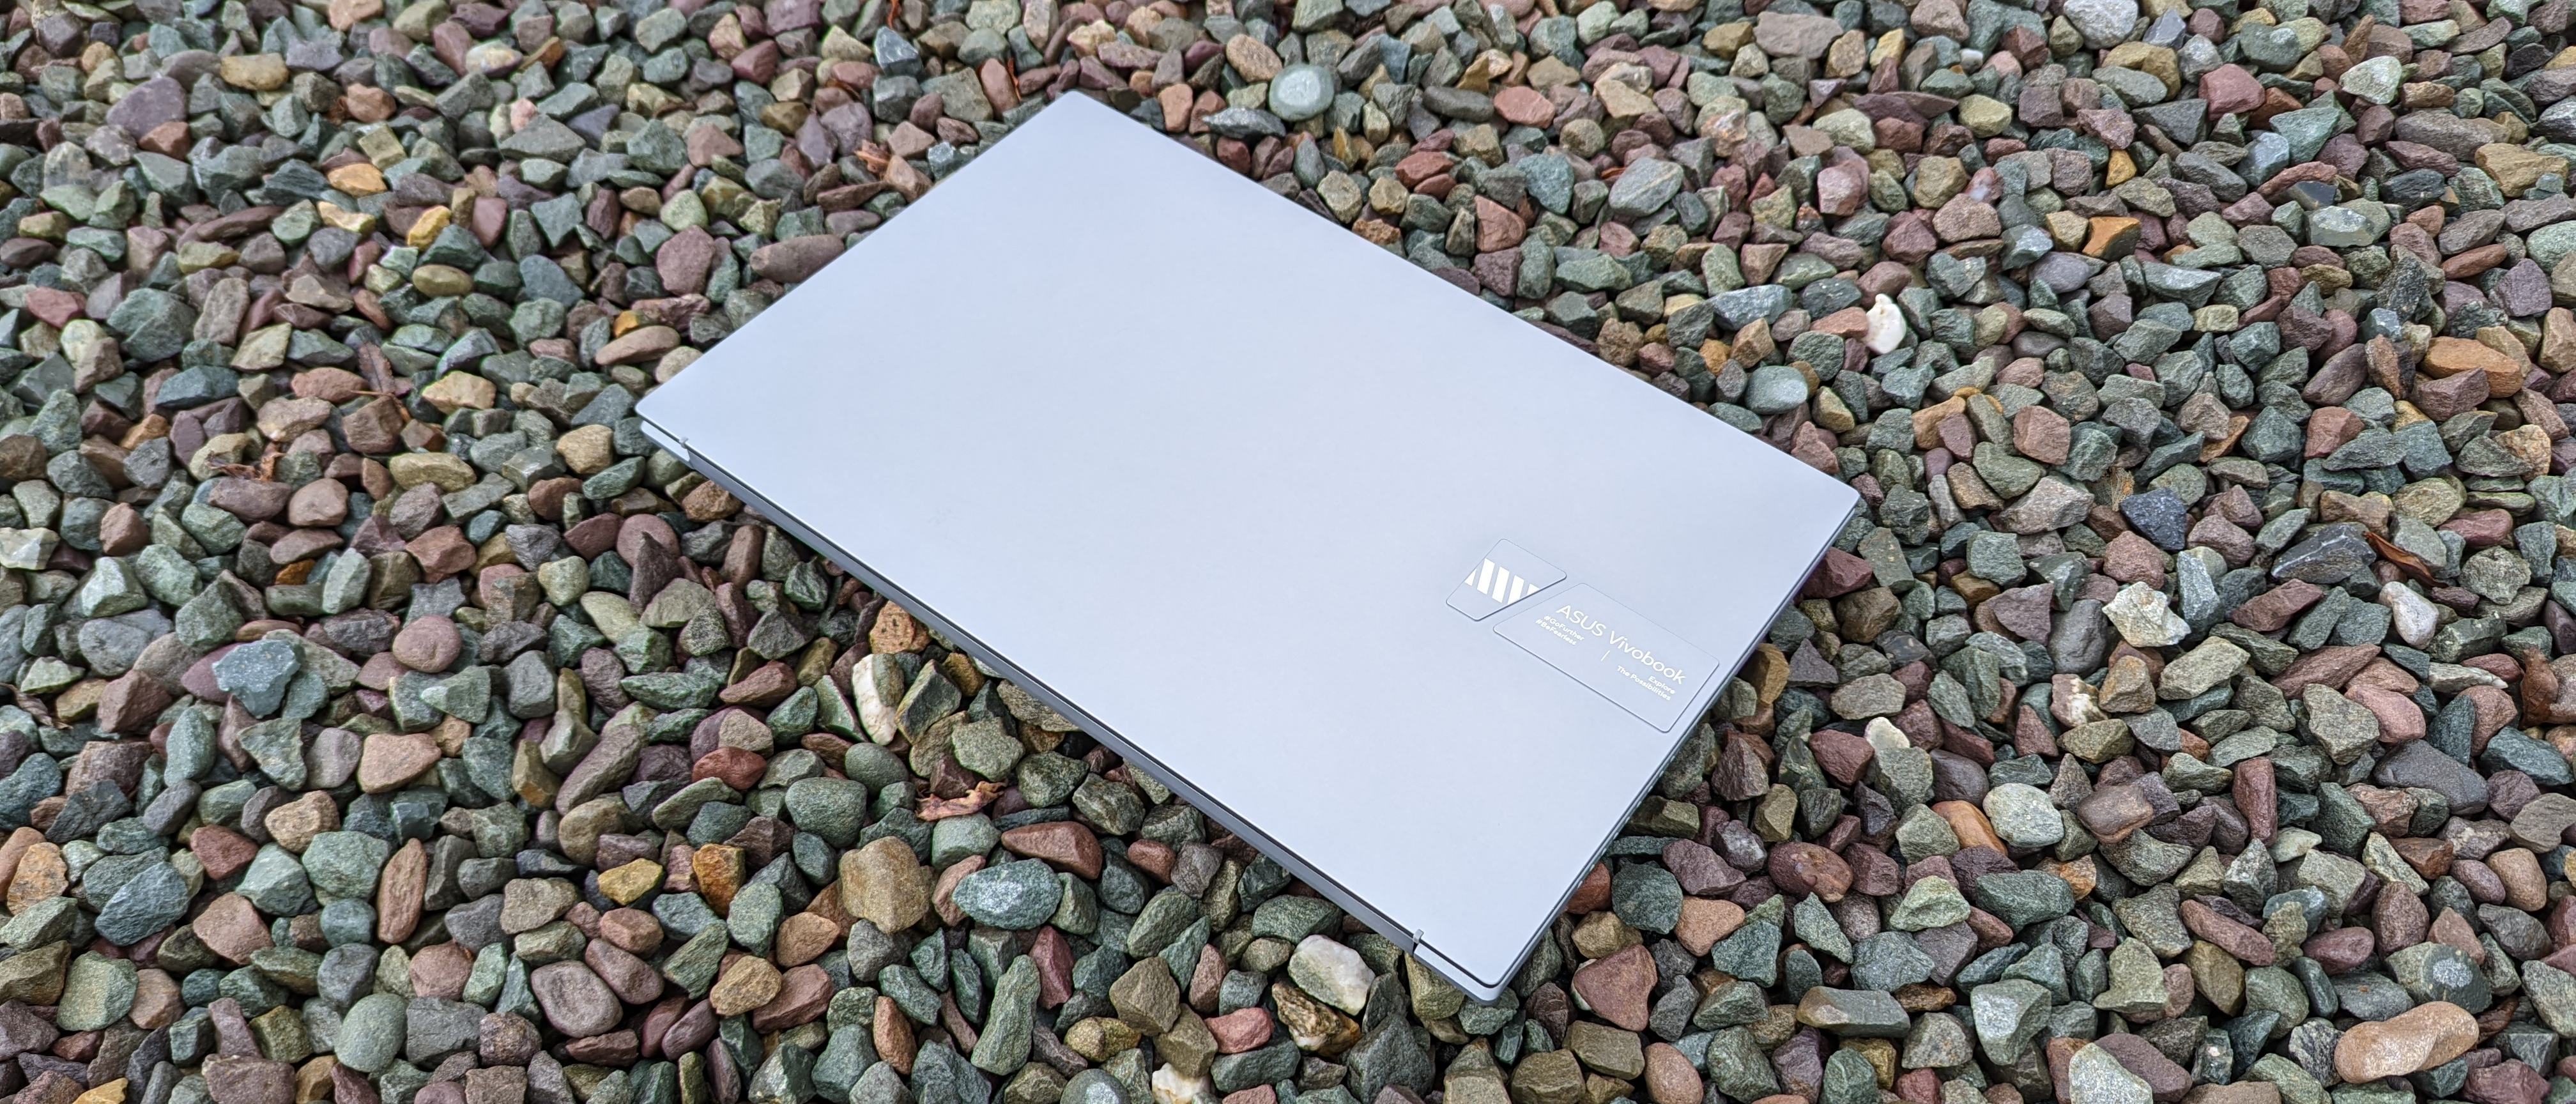 Asus Vivobook 15 review - The Verge